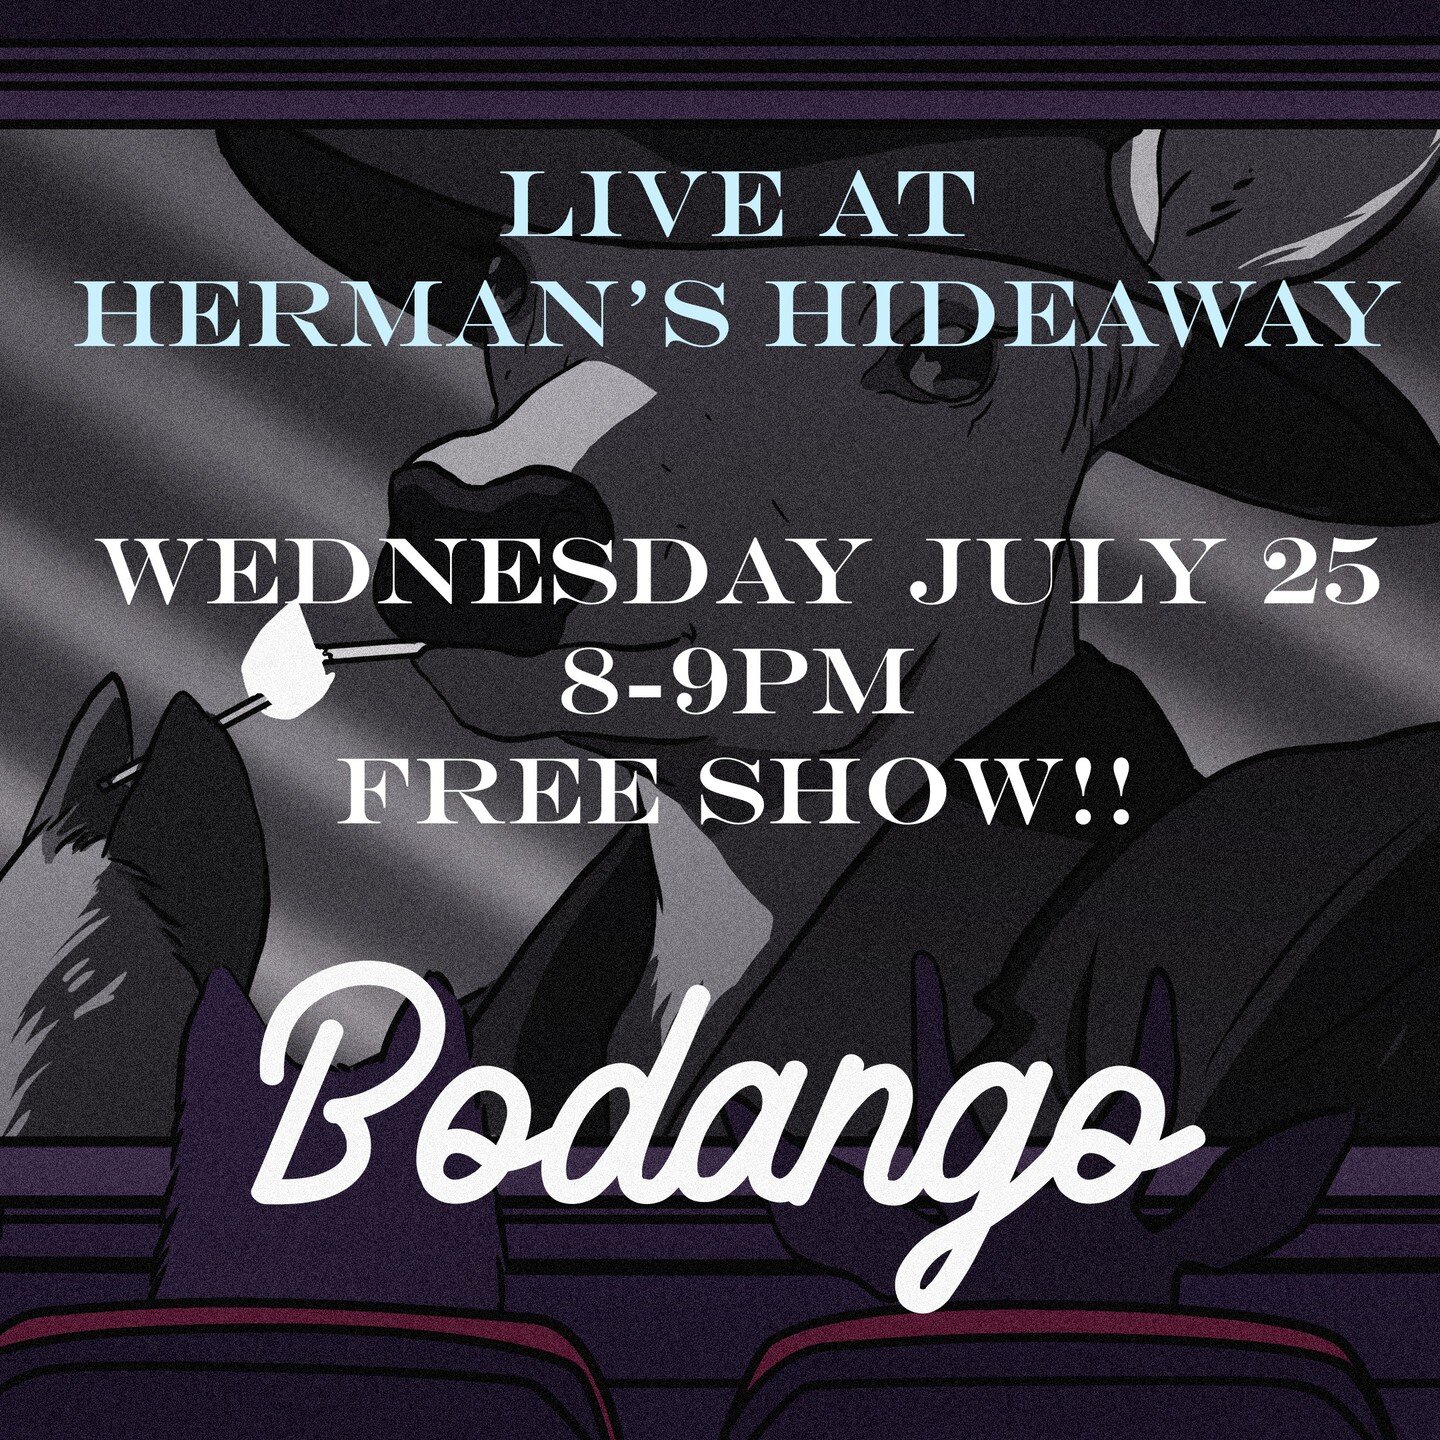 Tomorrow!!!

Playing a free show at Herman's Hideaway from 8-9pm!! We would love to see you there!